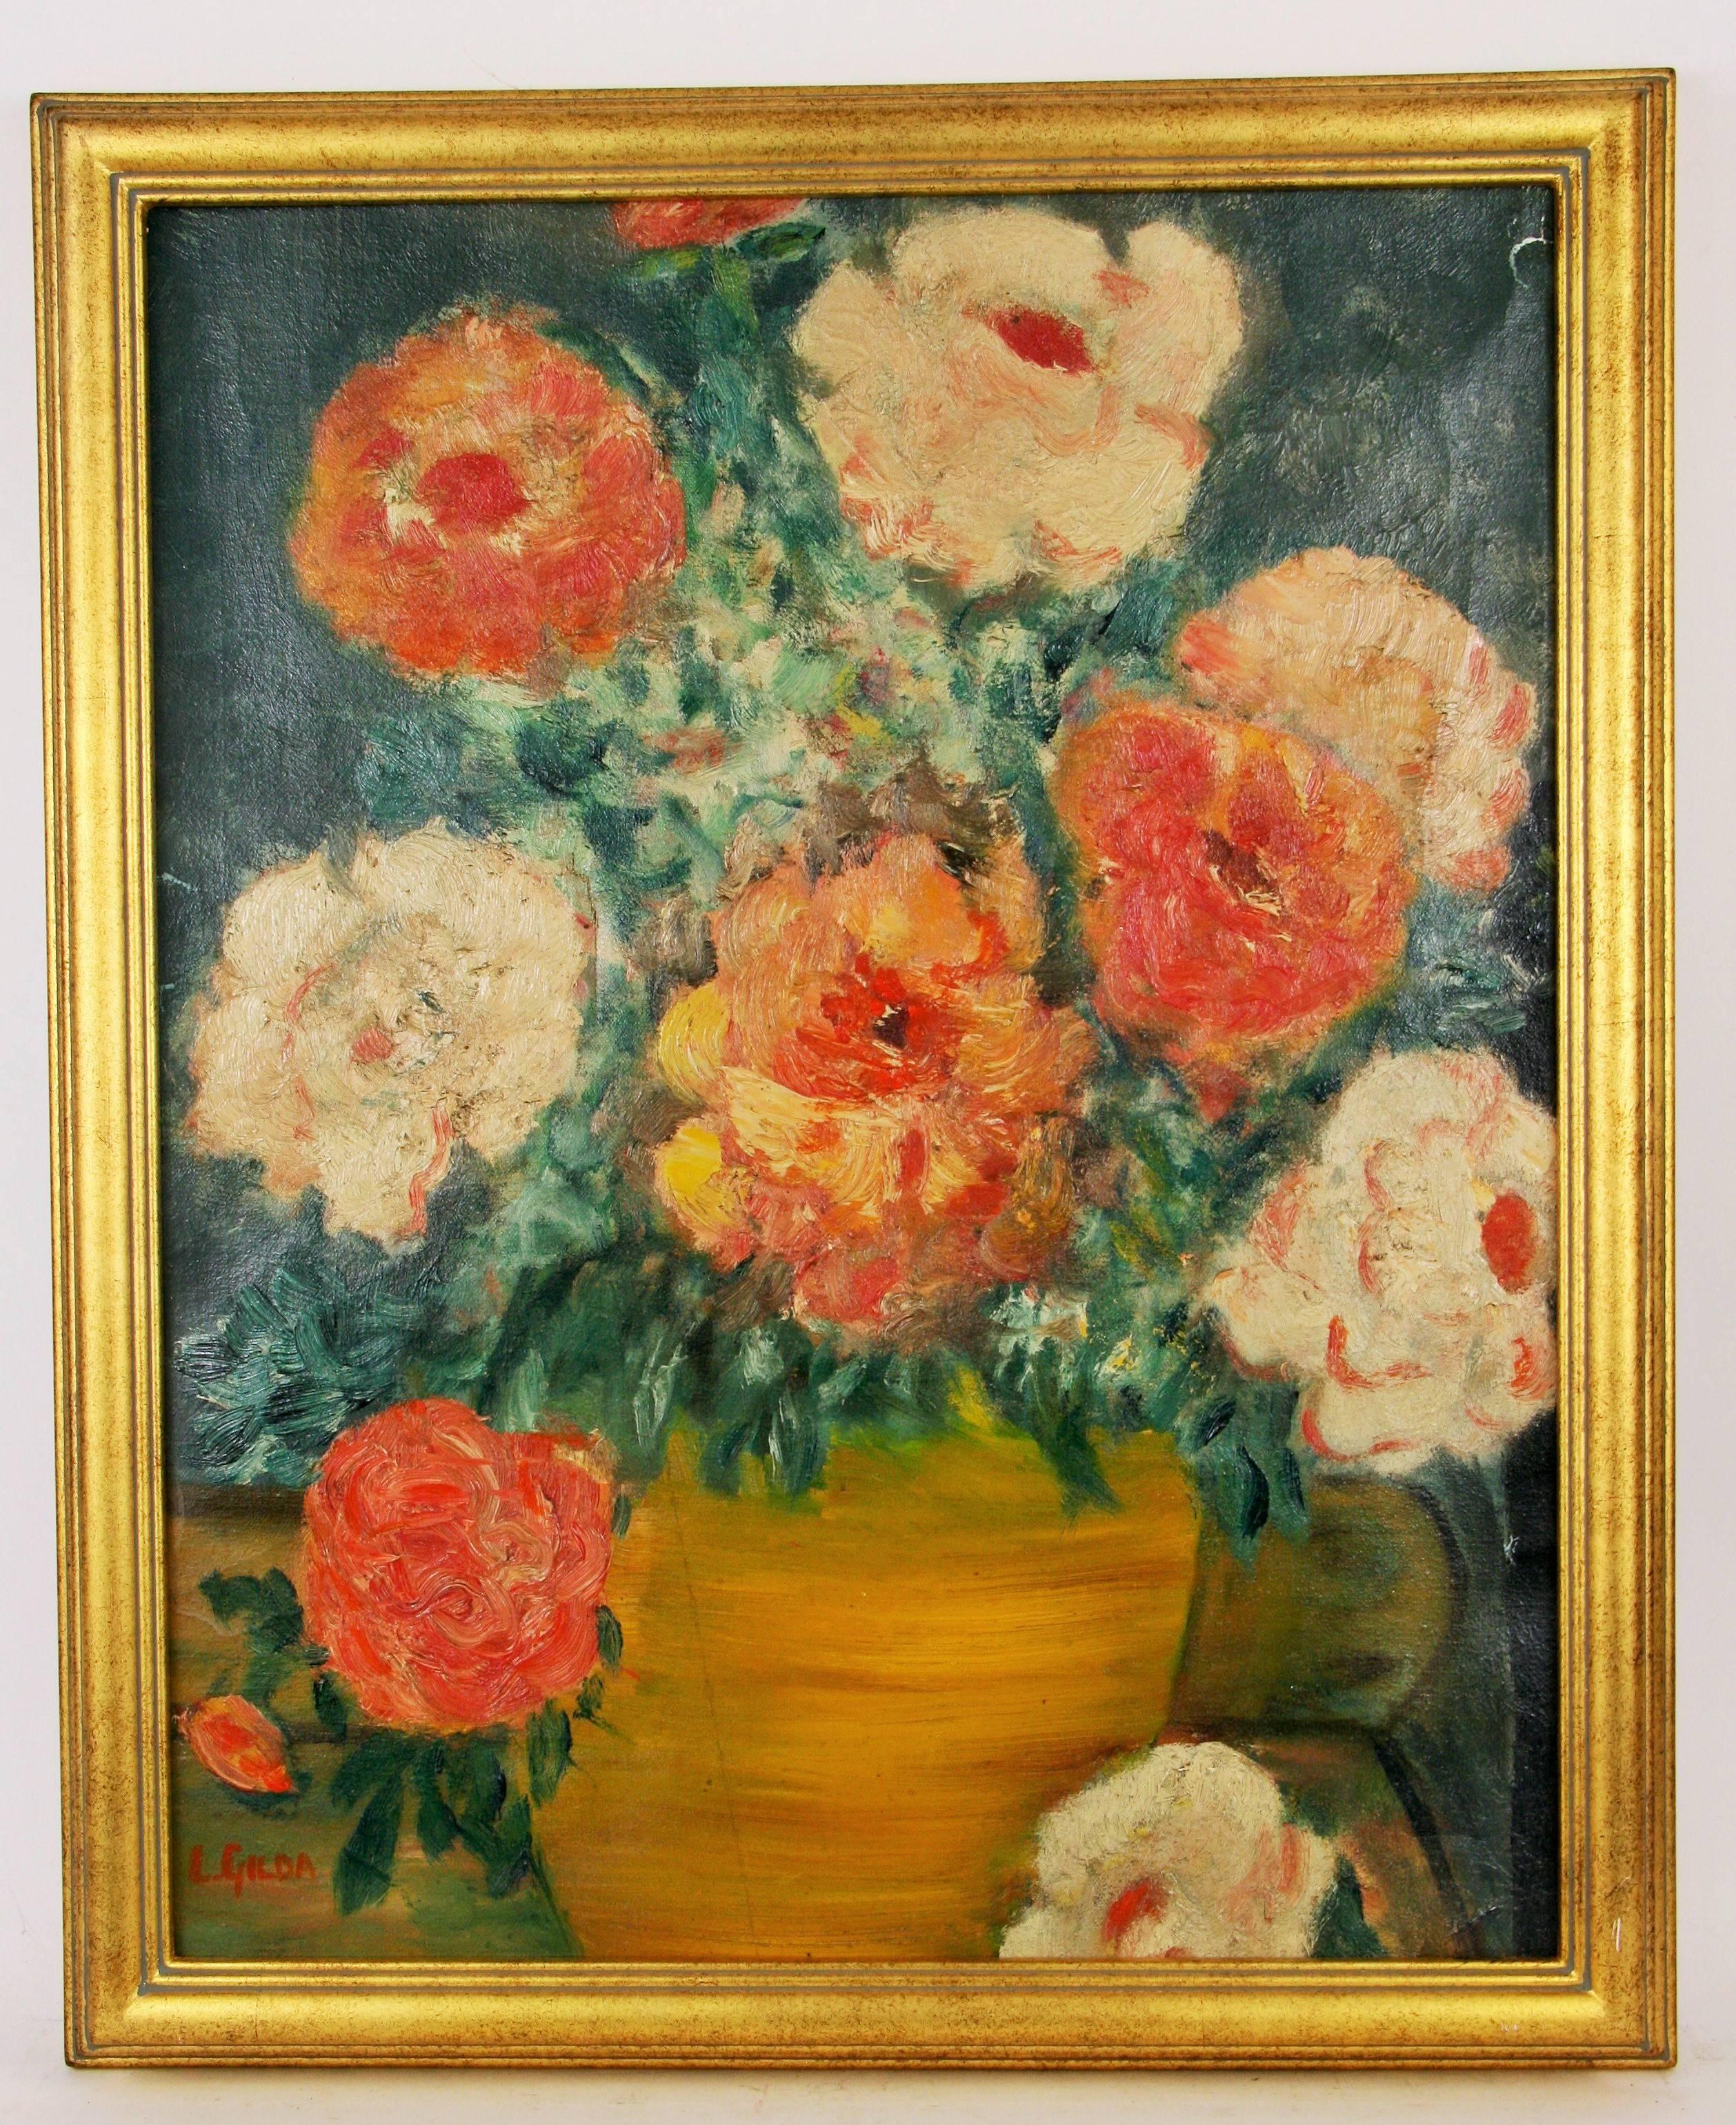 5-3213a  Impressionist style floral still life
Displayed in a gilt wood frame
Image size 19.5x15.5